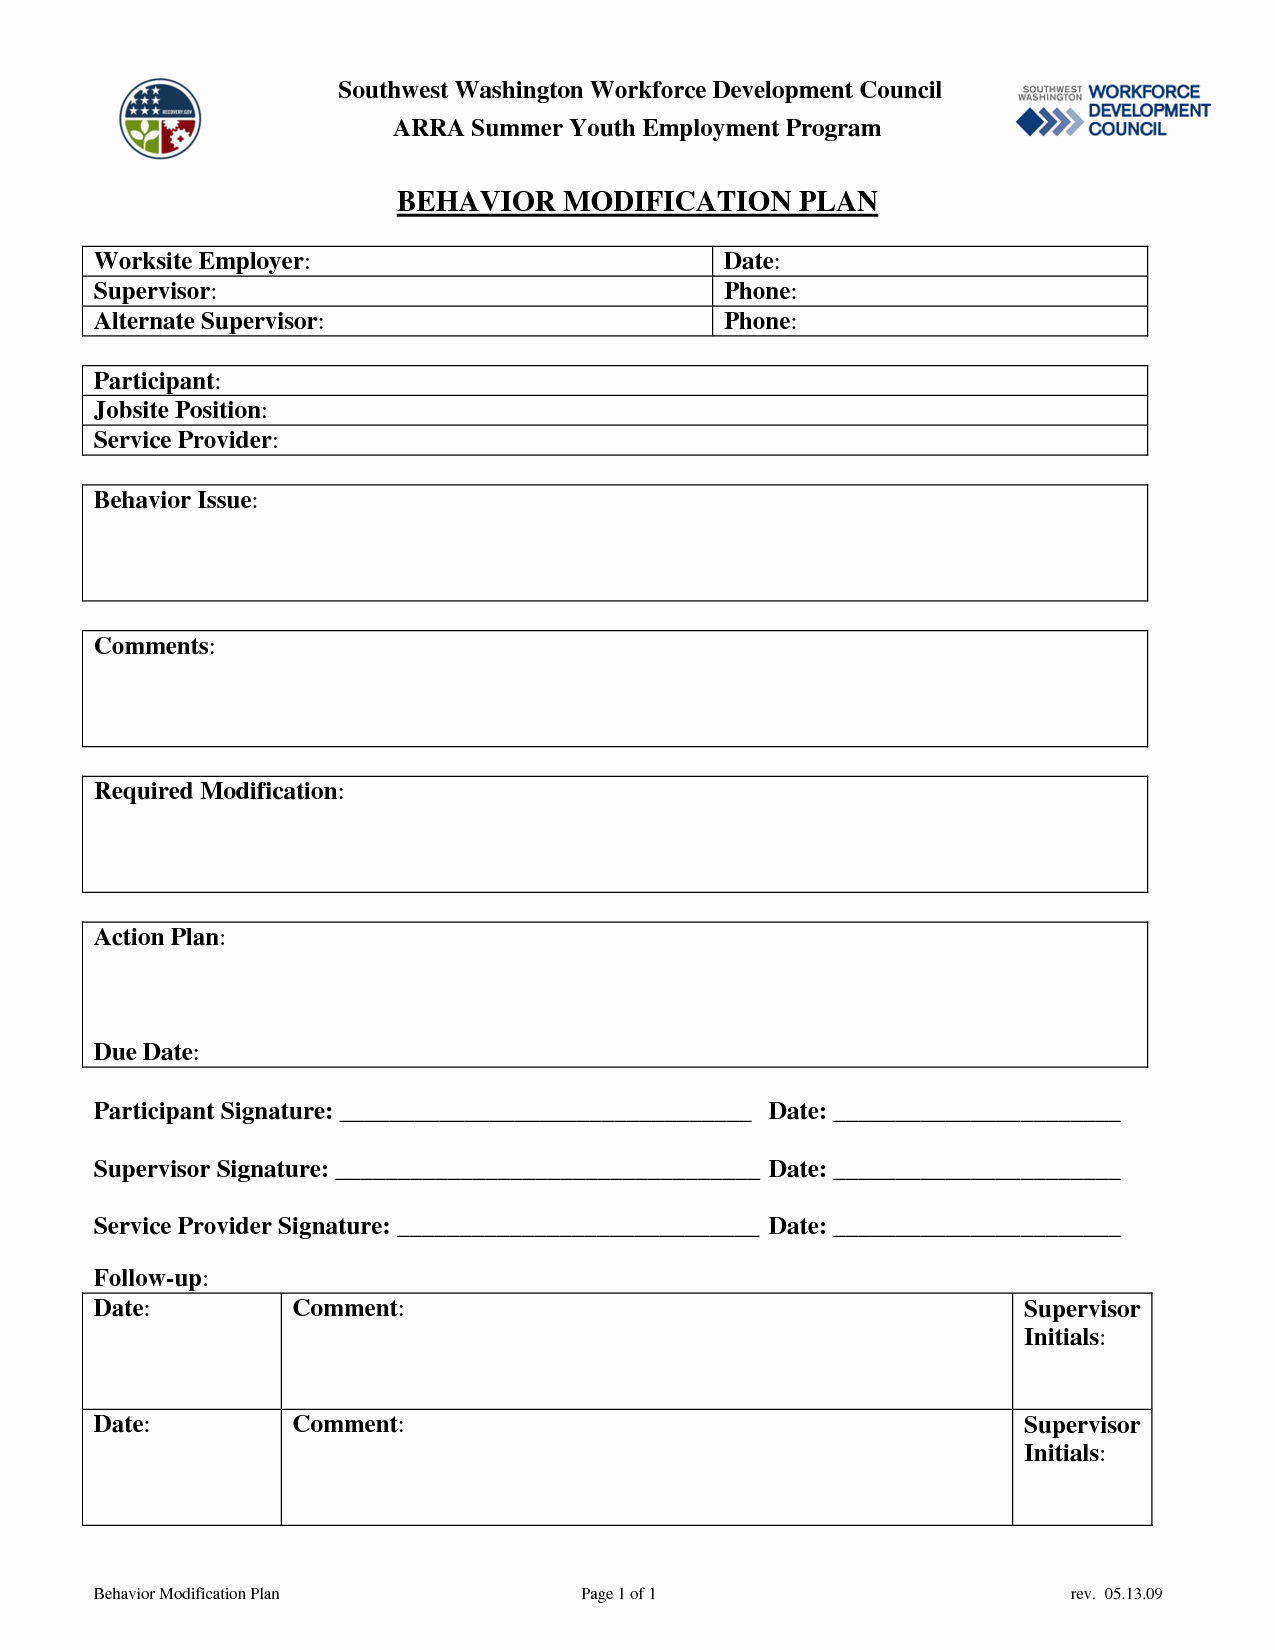 Behavior Modification Plan Template Awesome 14 Best Of Behavior Modification Worksheets